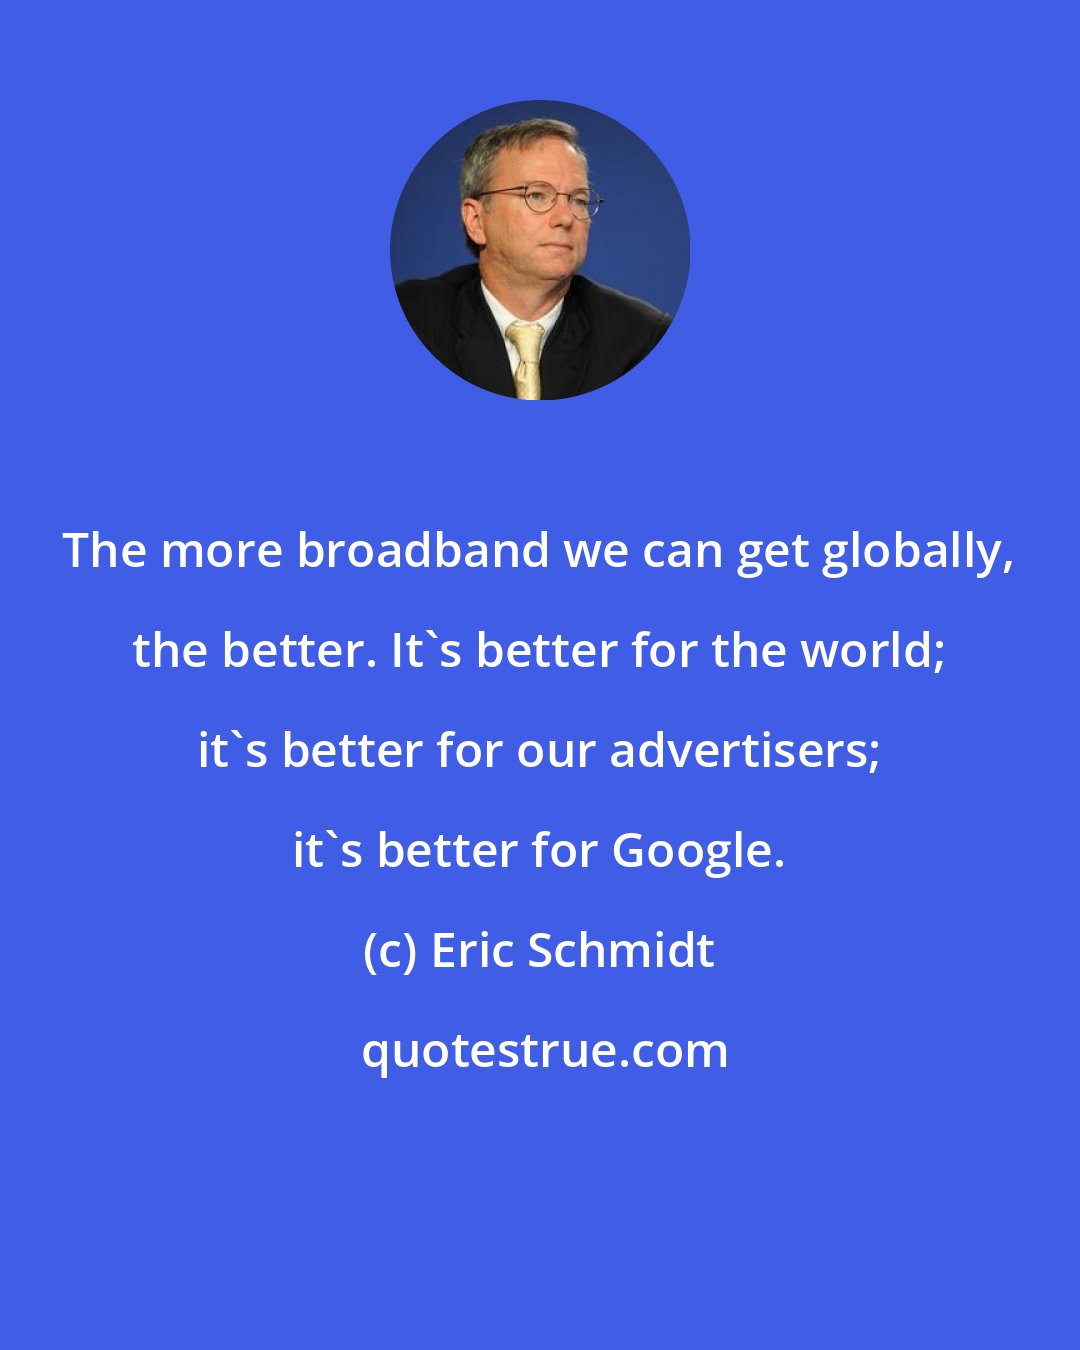 Eric Schmidt: The more broadband we can get globally, the better. It's better for the world; it's better for our advertisers; it's better for Google.